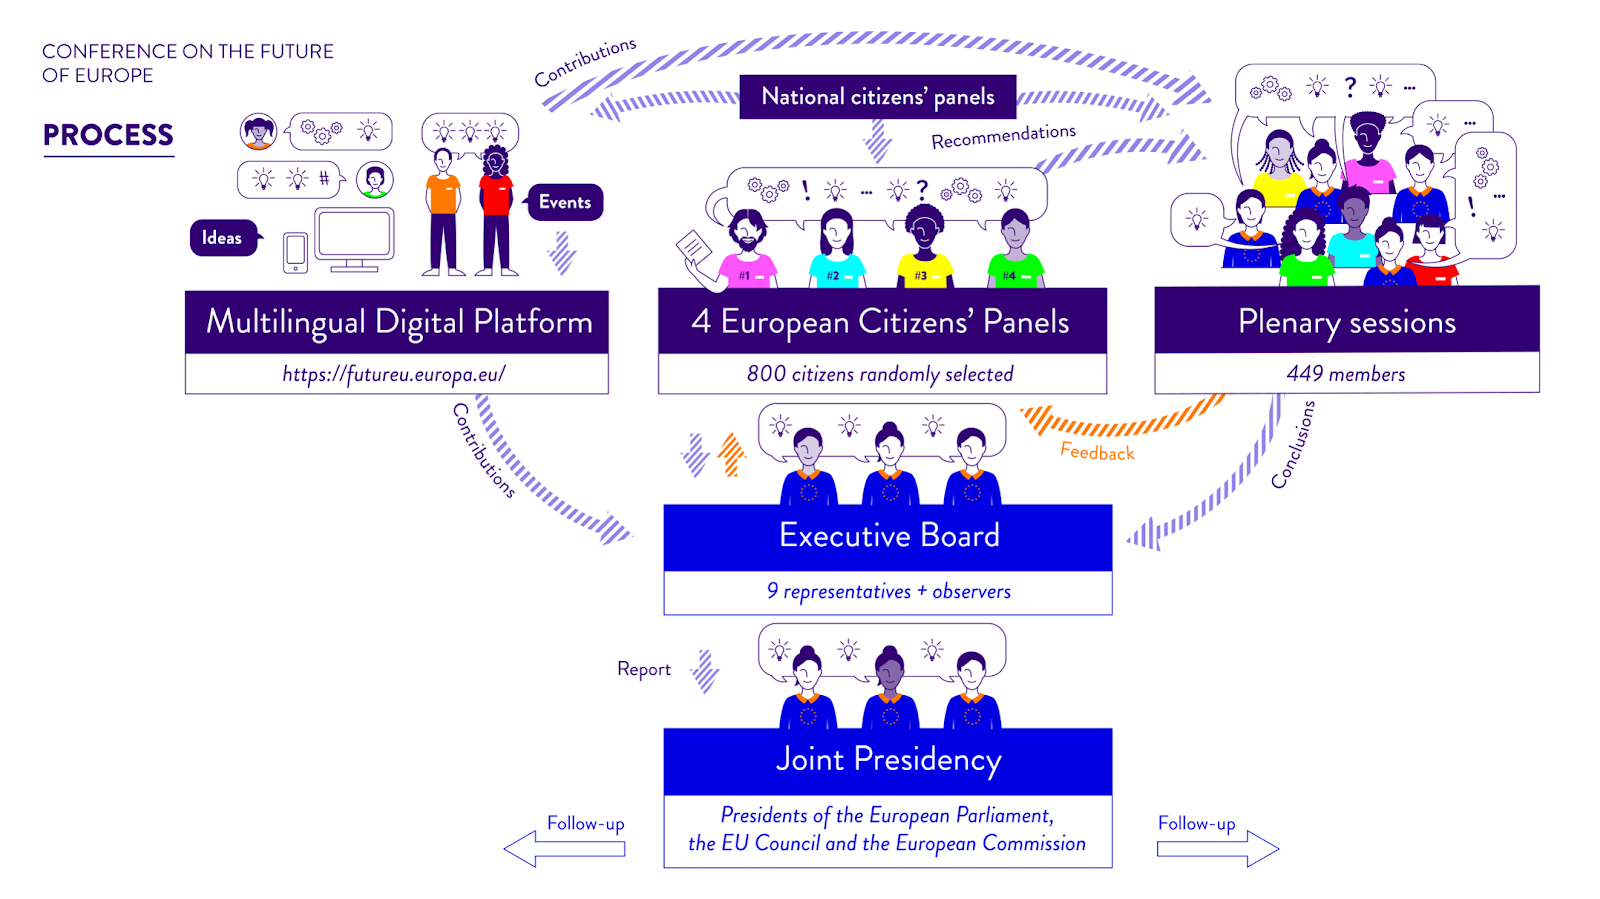 Graphic of the institutional set-up of the Conference on the Future of Europe